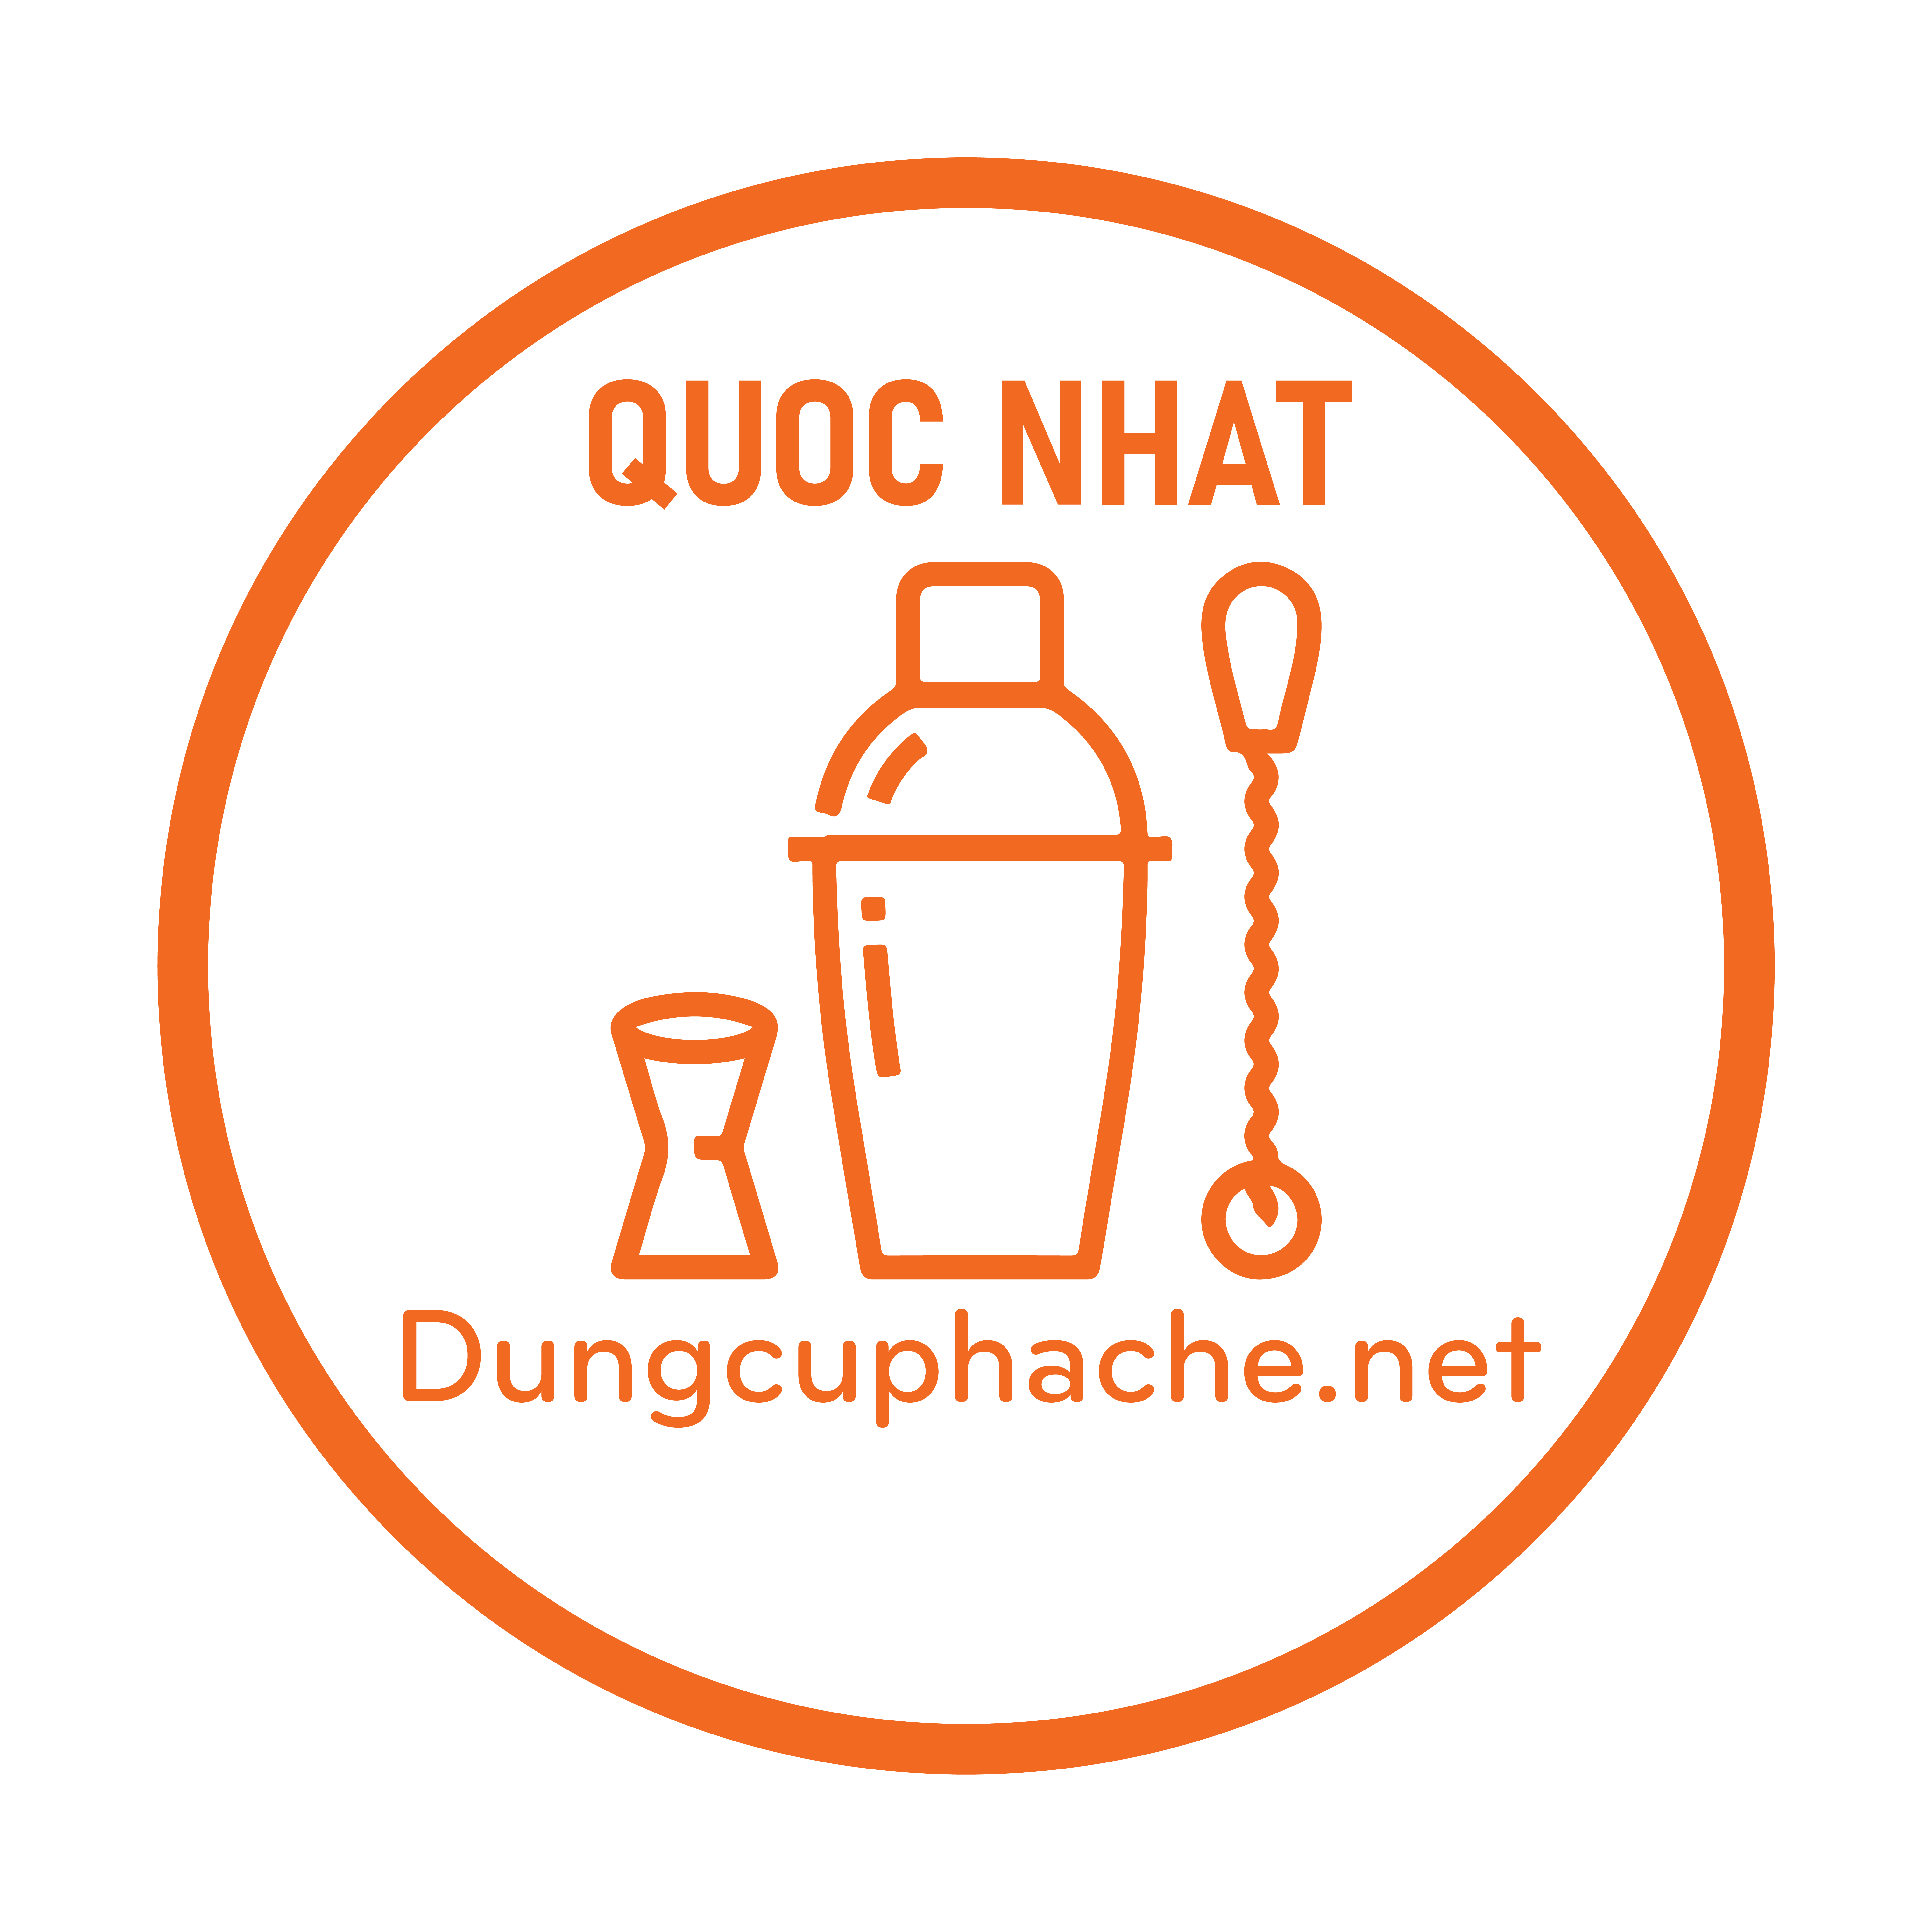 dungcuphache.net